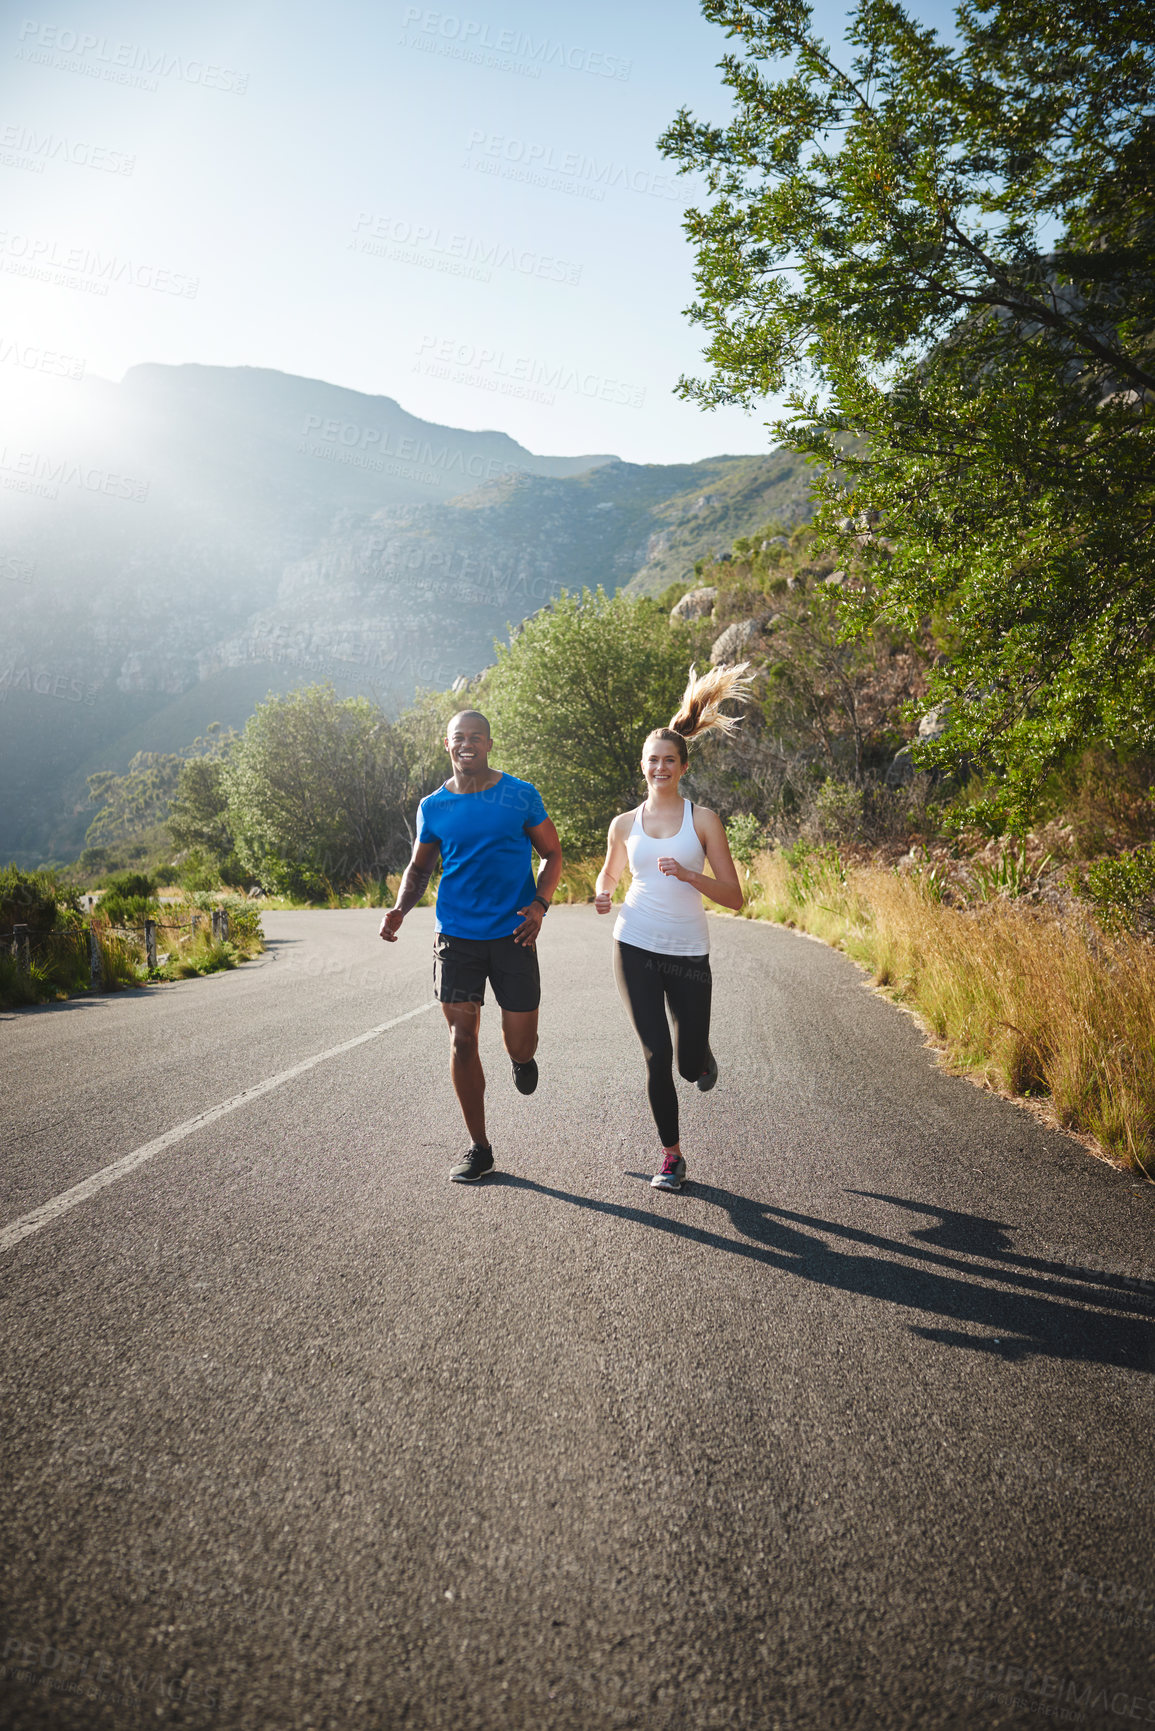 Buy stock photo Shot of a sporty couple out running on a mountain road